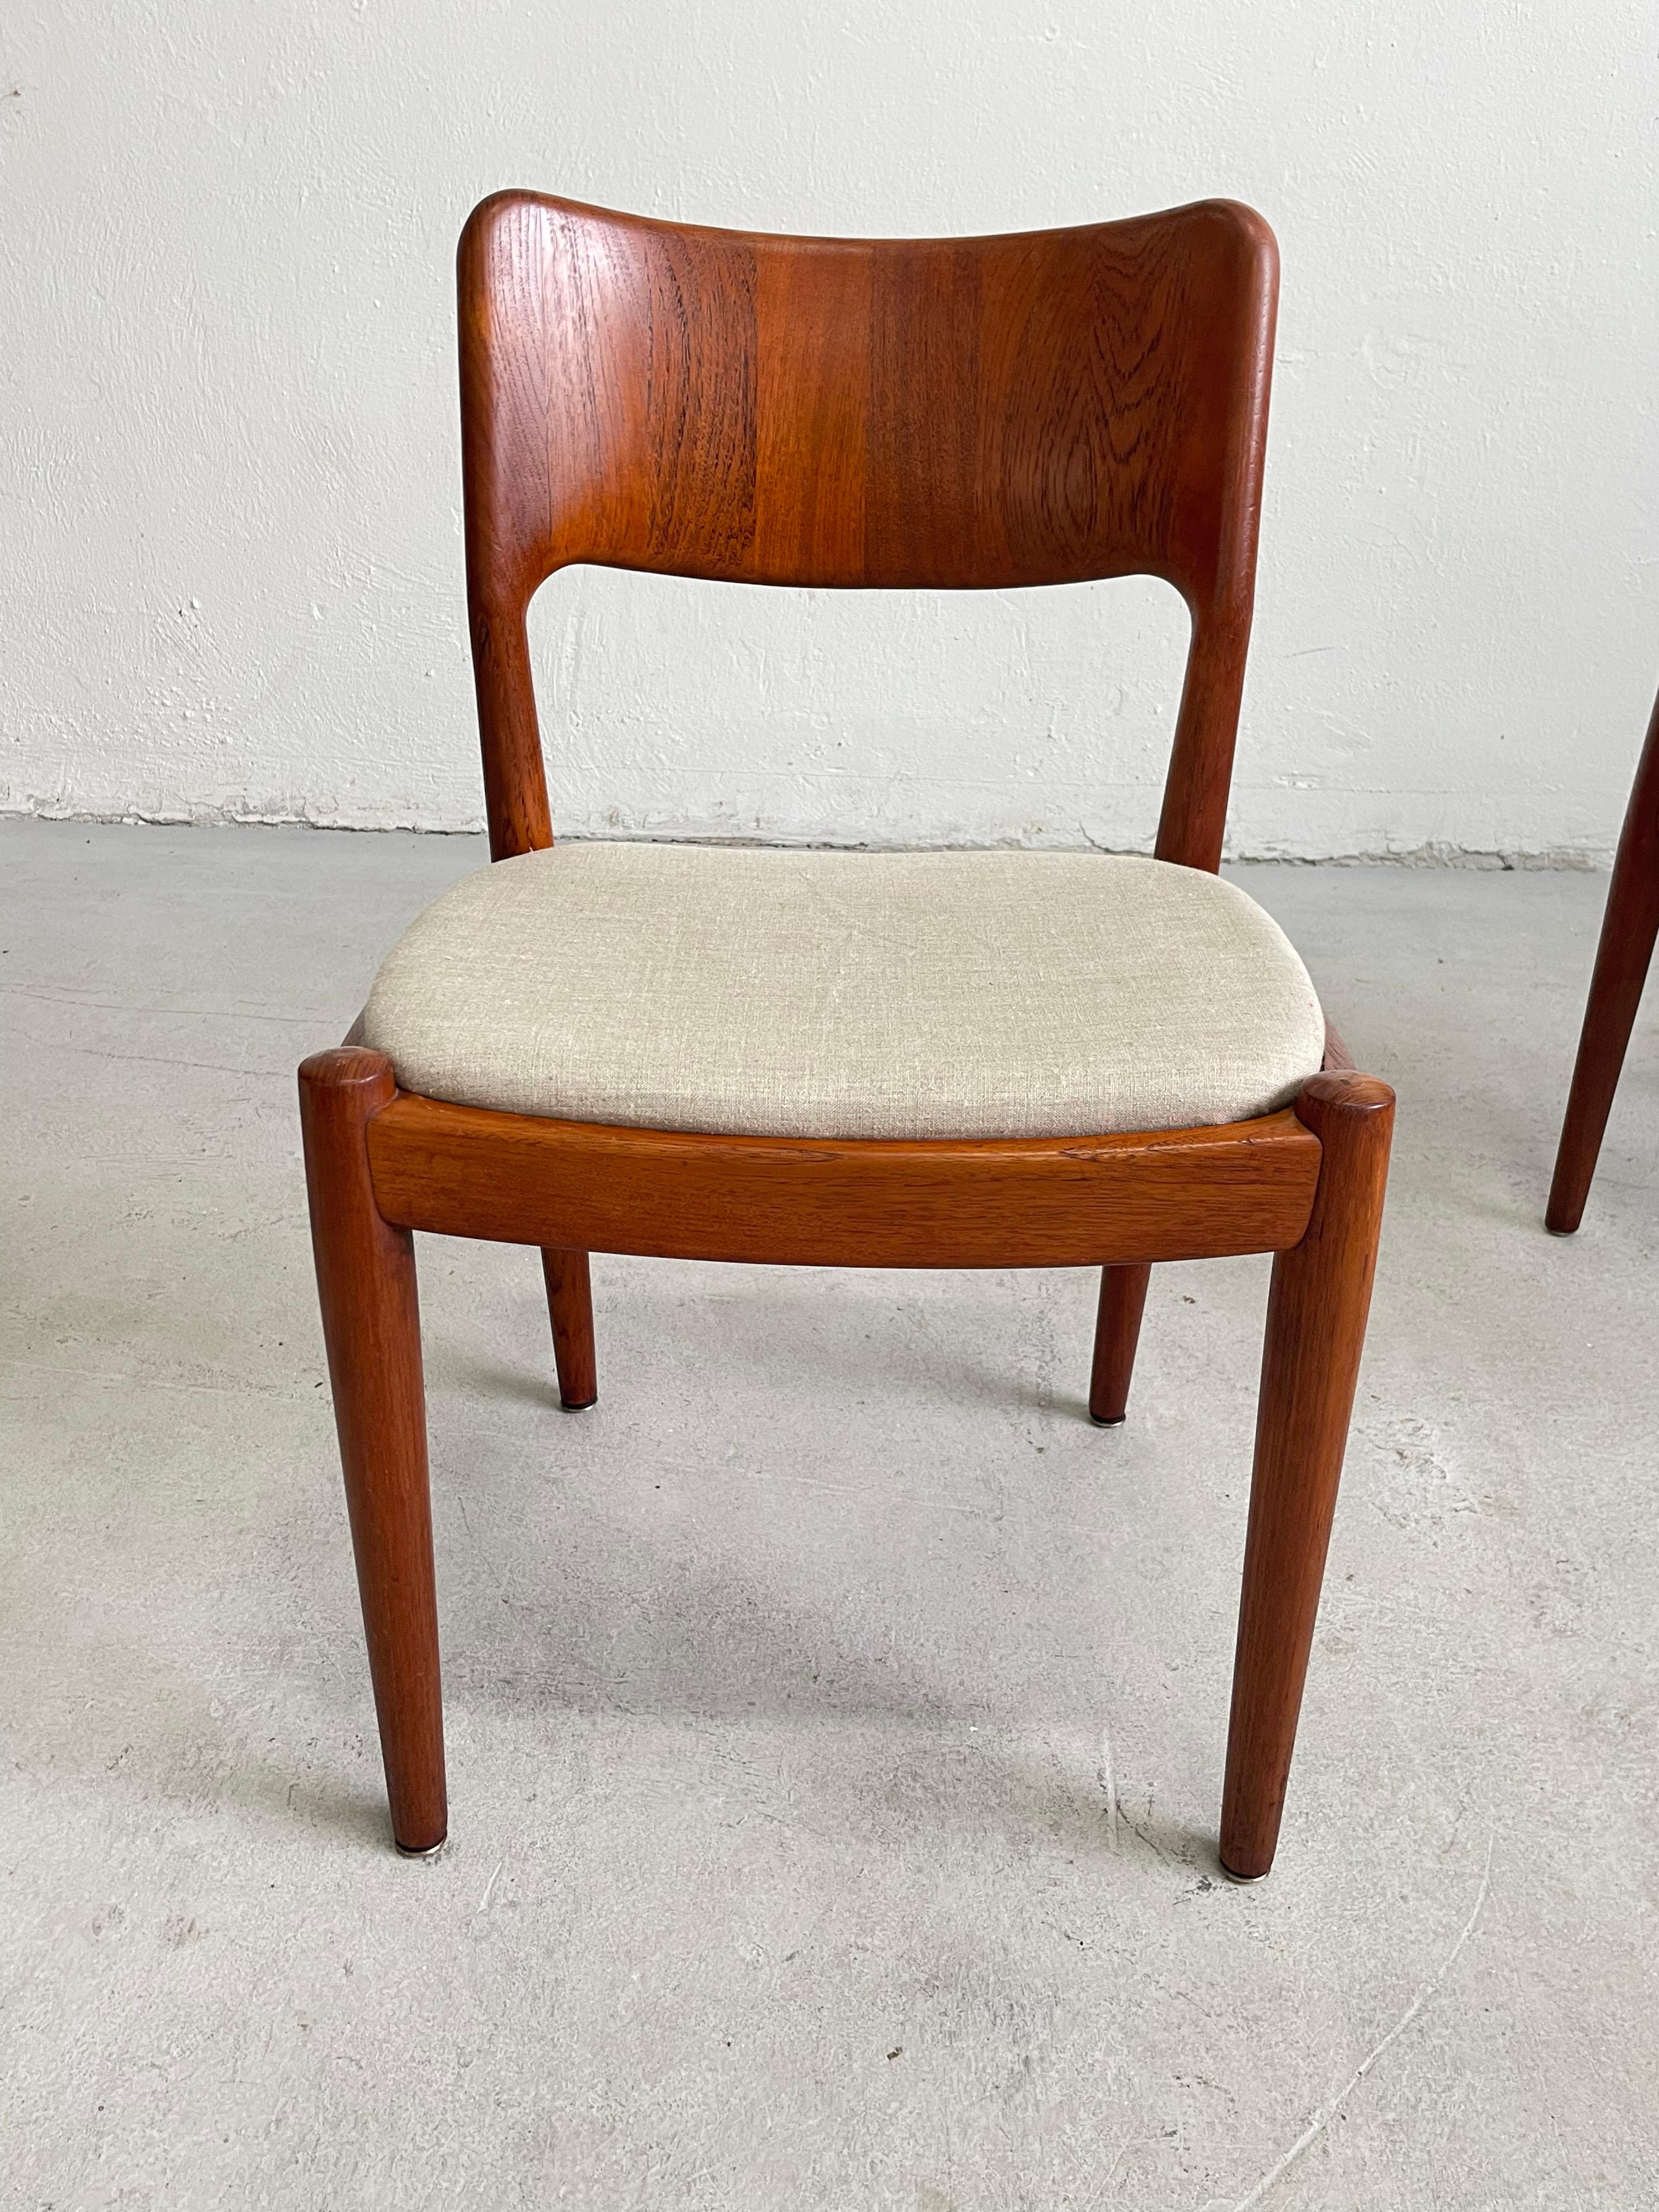 Mid-20th Century Set of 4 Vintage Scandinavian Mid-century Modern Teak Dining Chairs by Glostrup For Sale